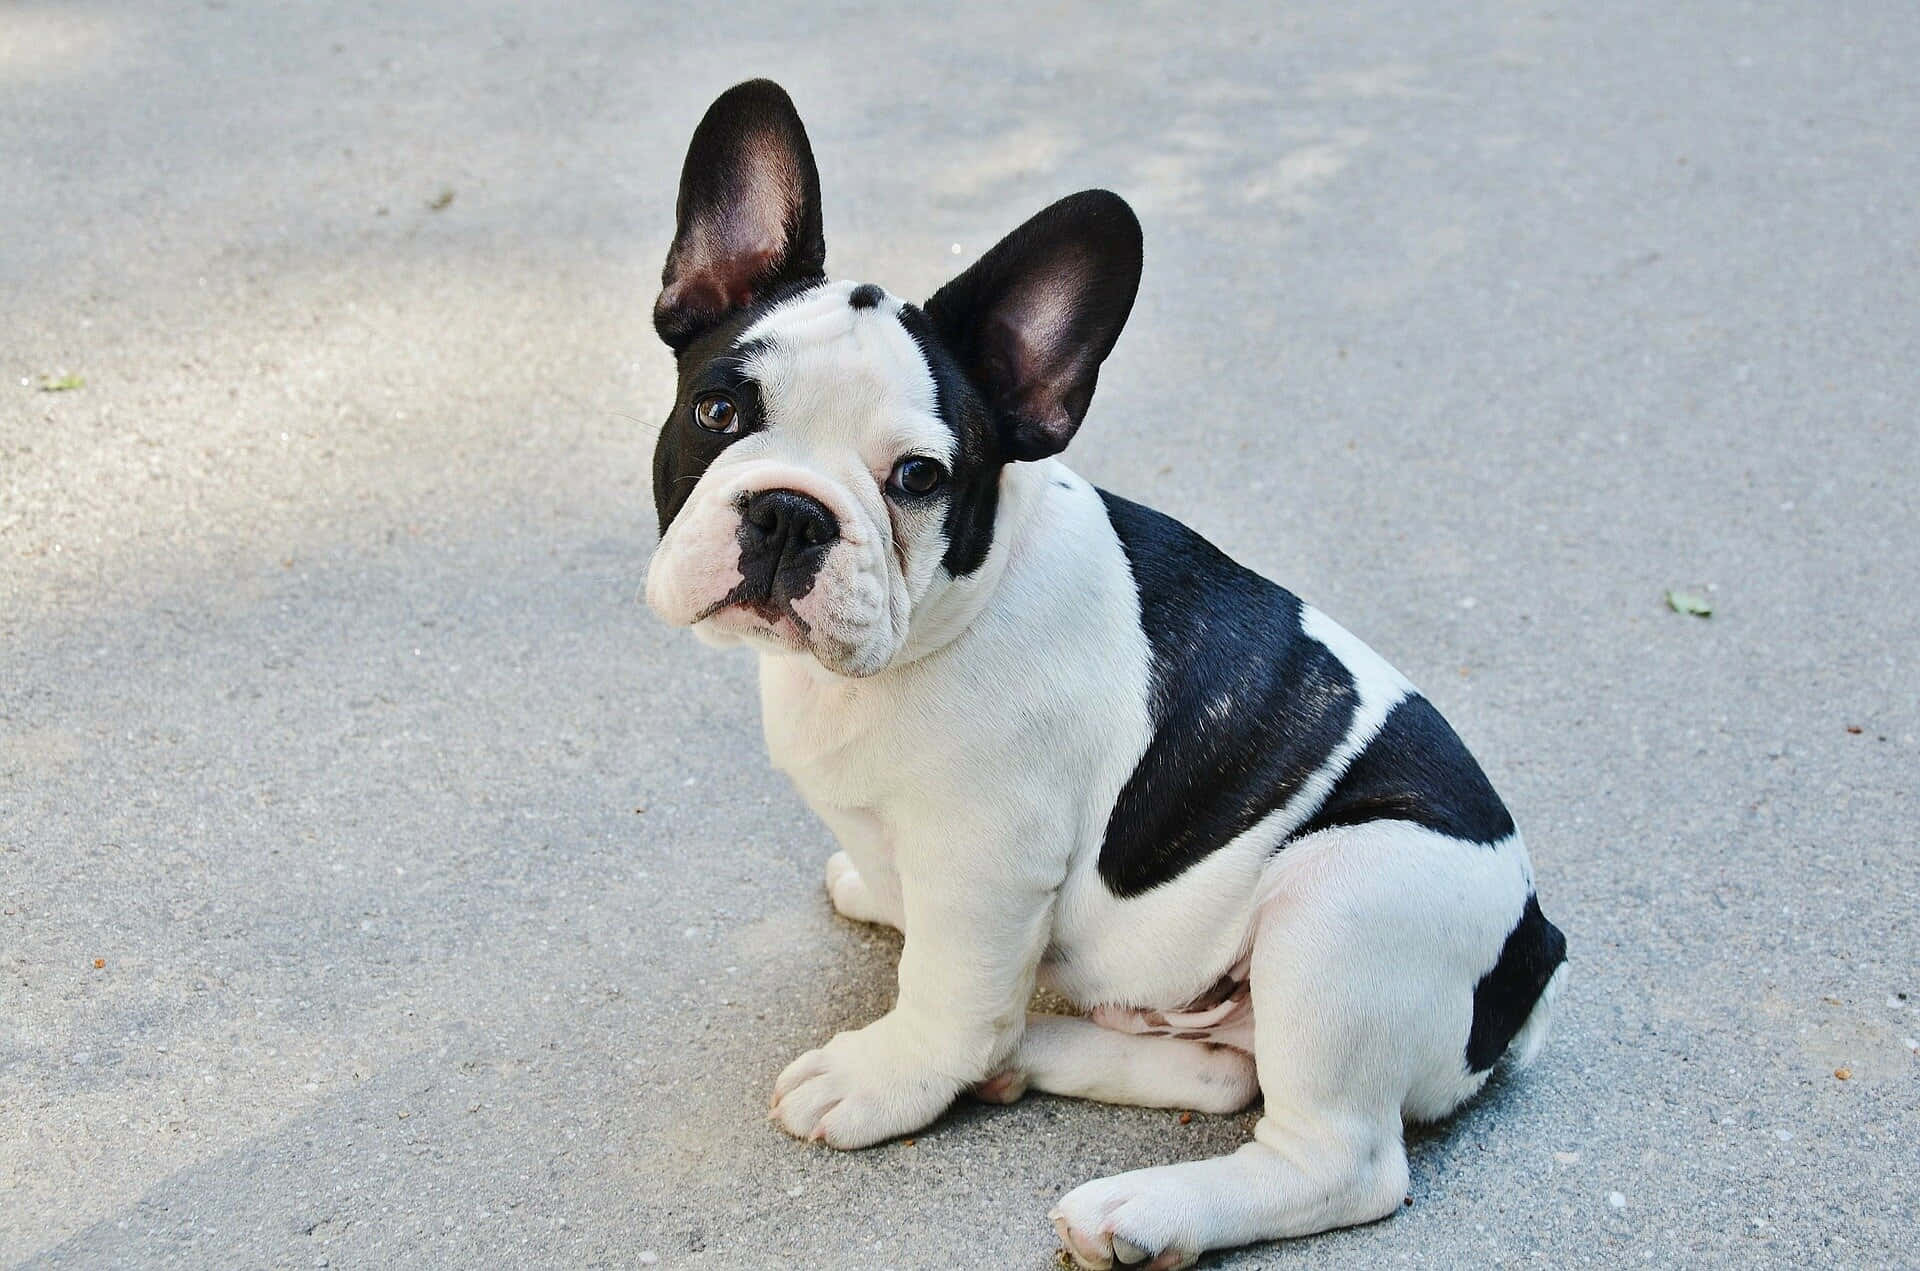 This happy french bulldog looks ready to cause some mischief